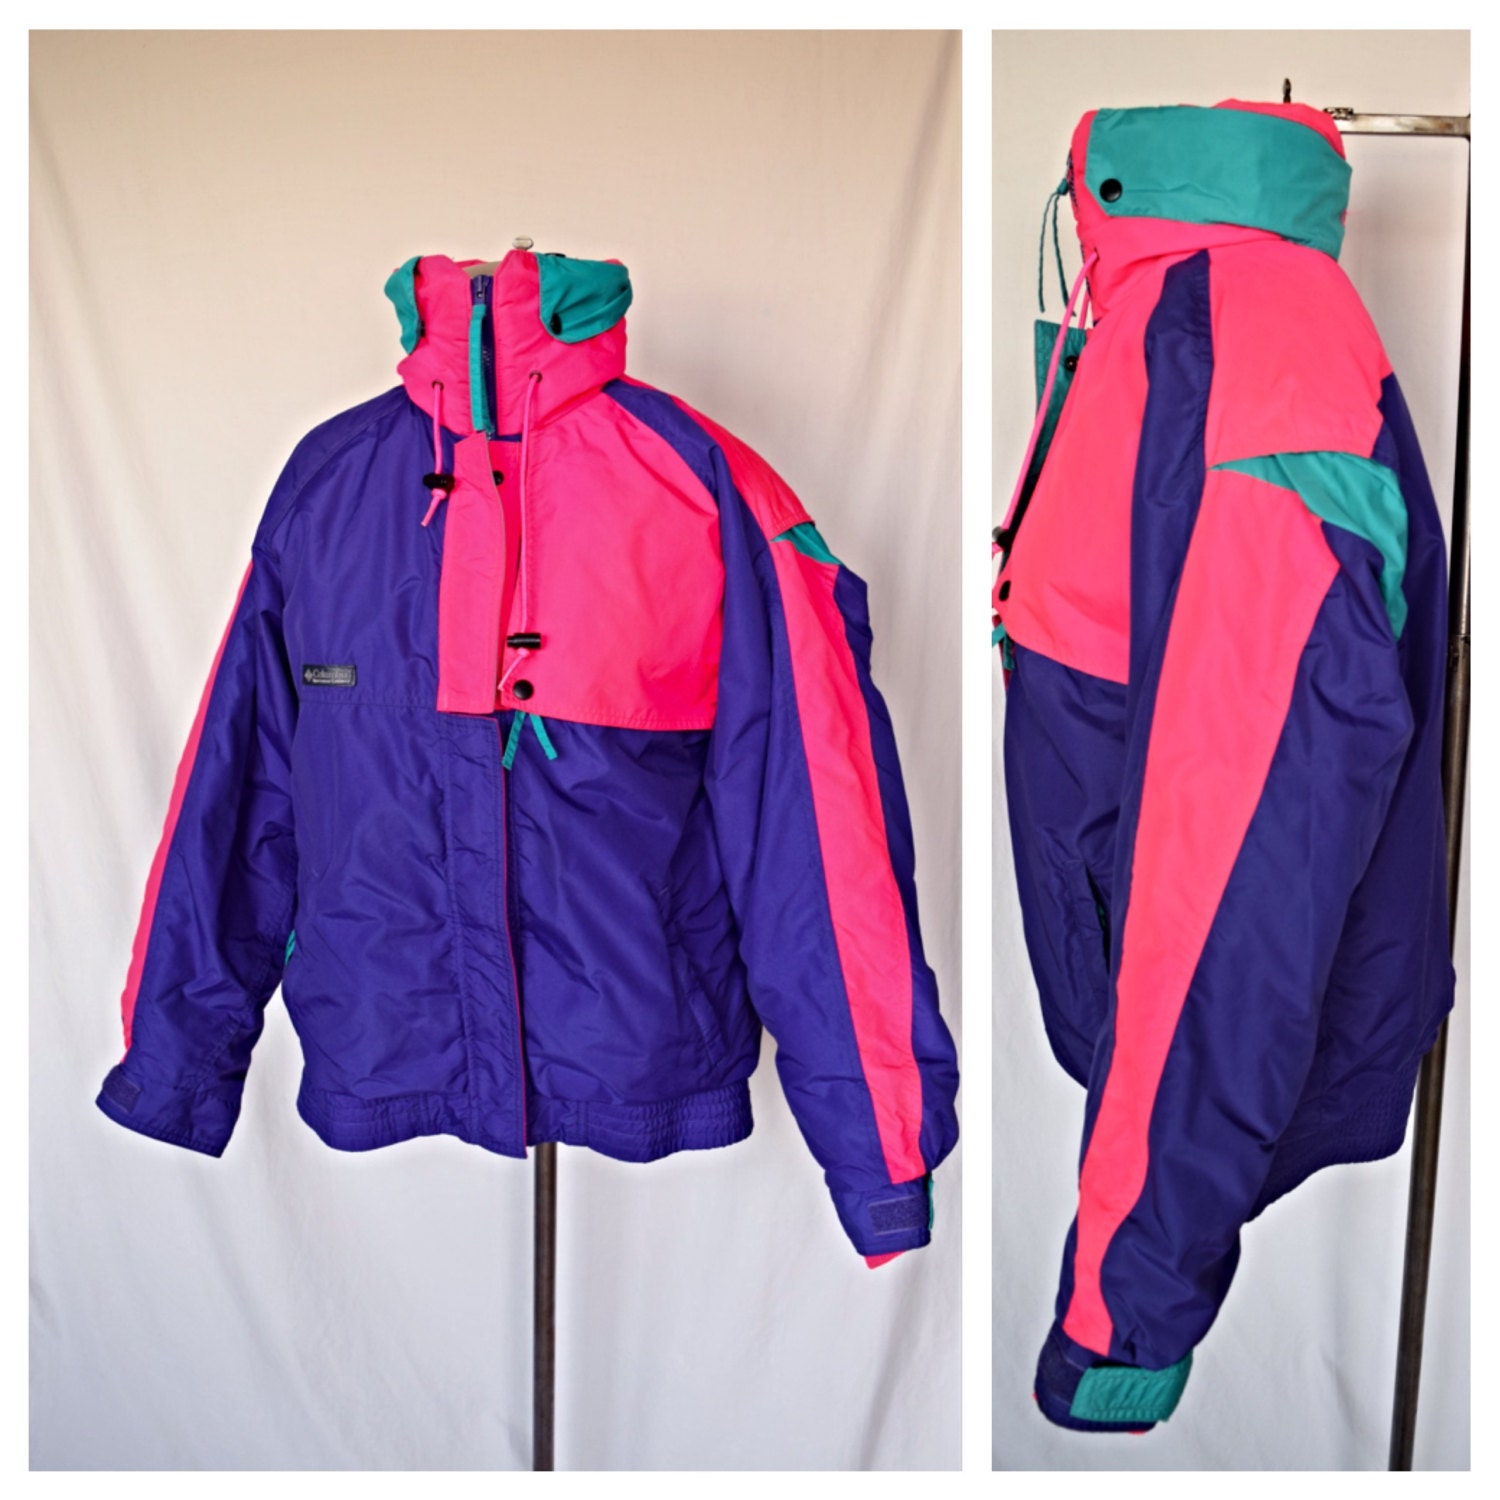 Vintage 90's Columbia Women's Ski Jacket by TheHighwayThrifters